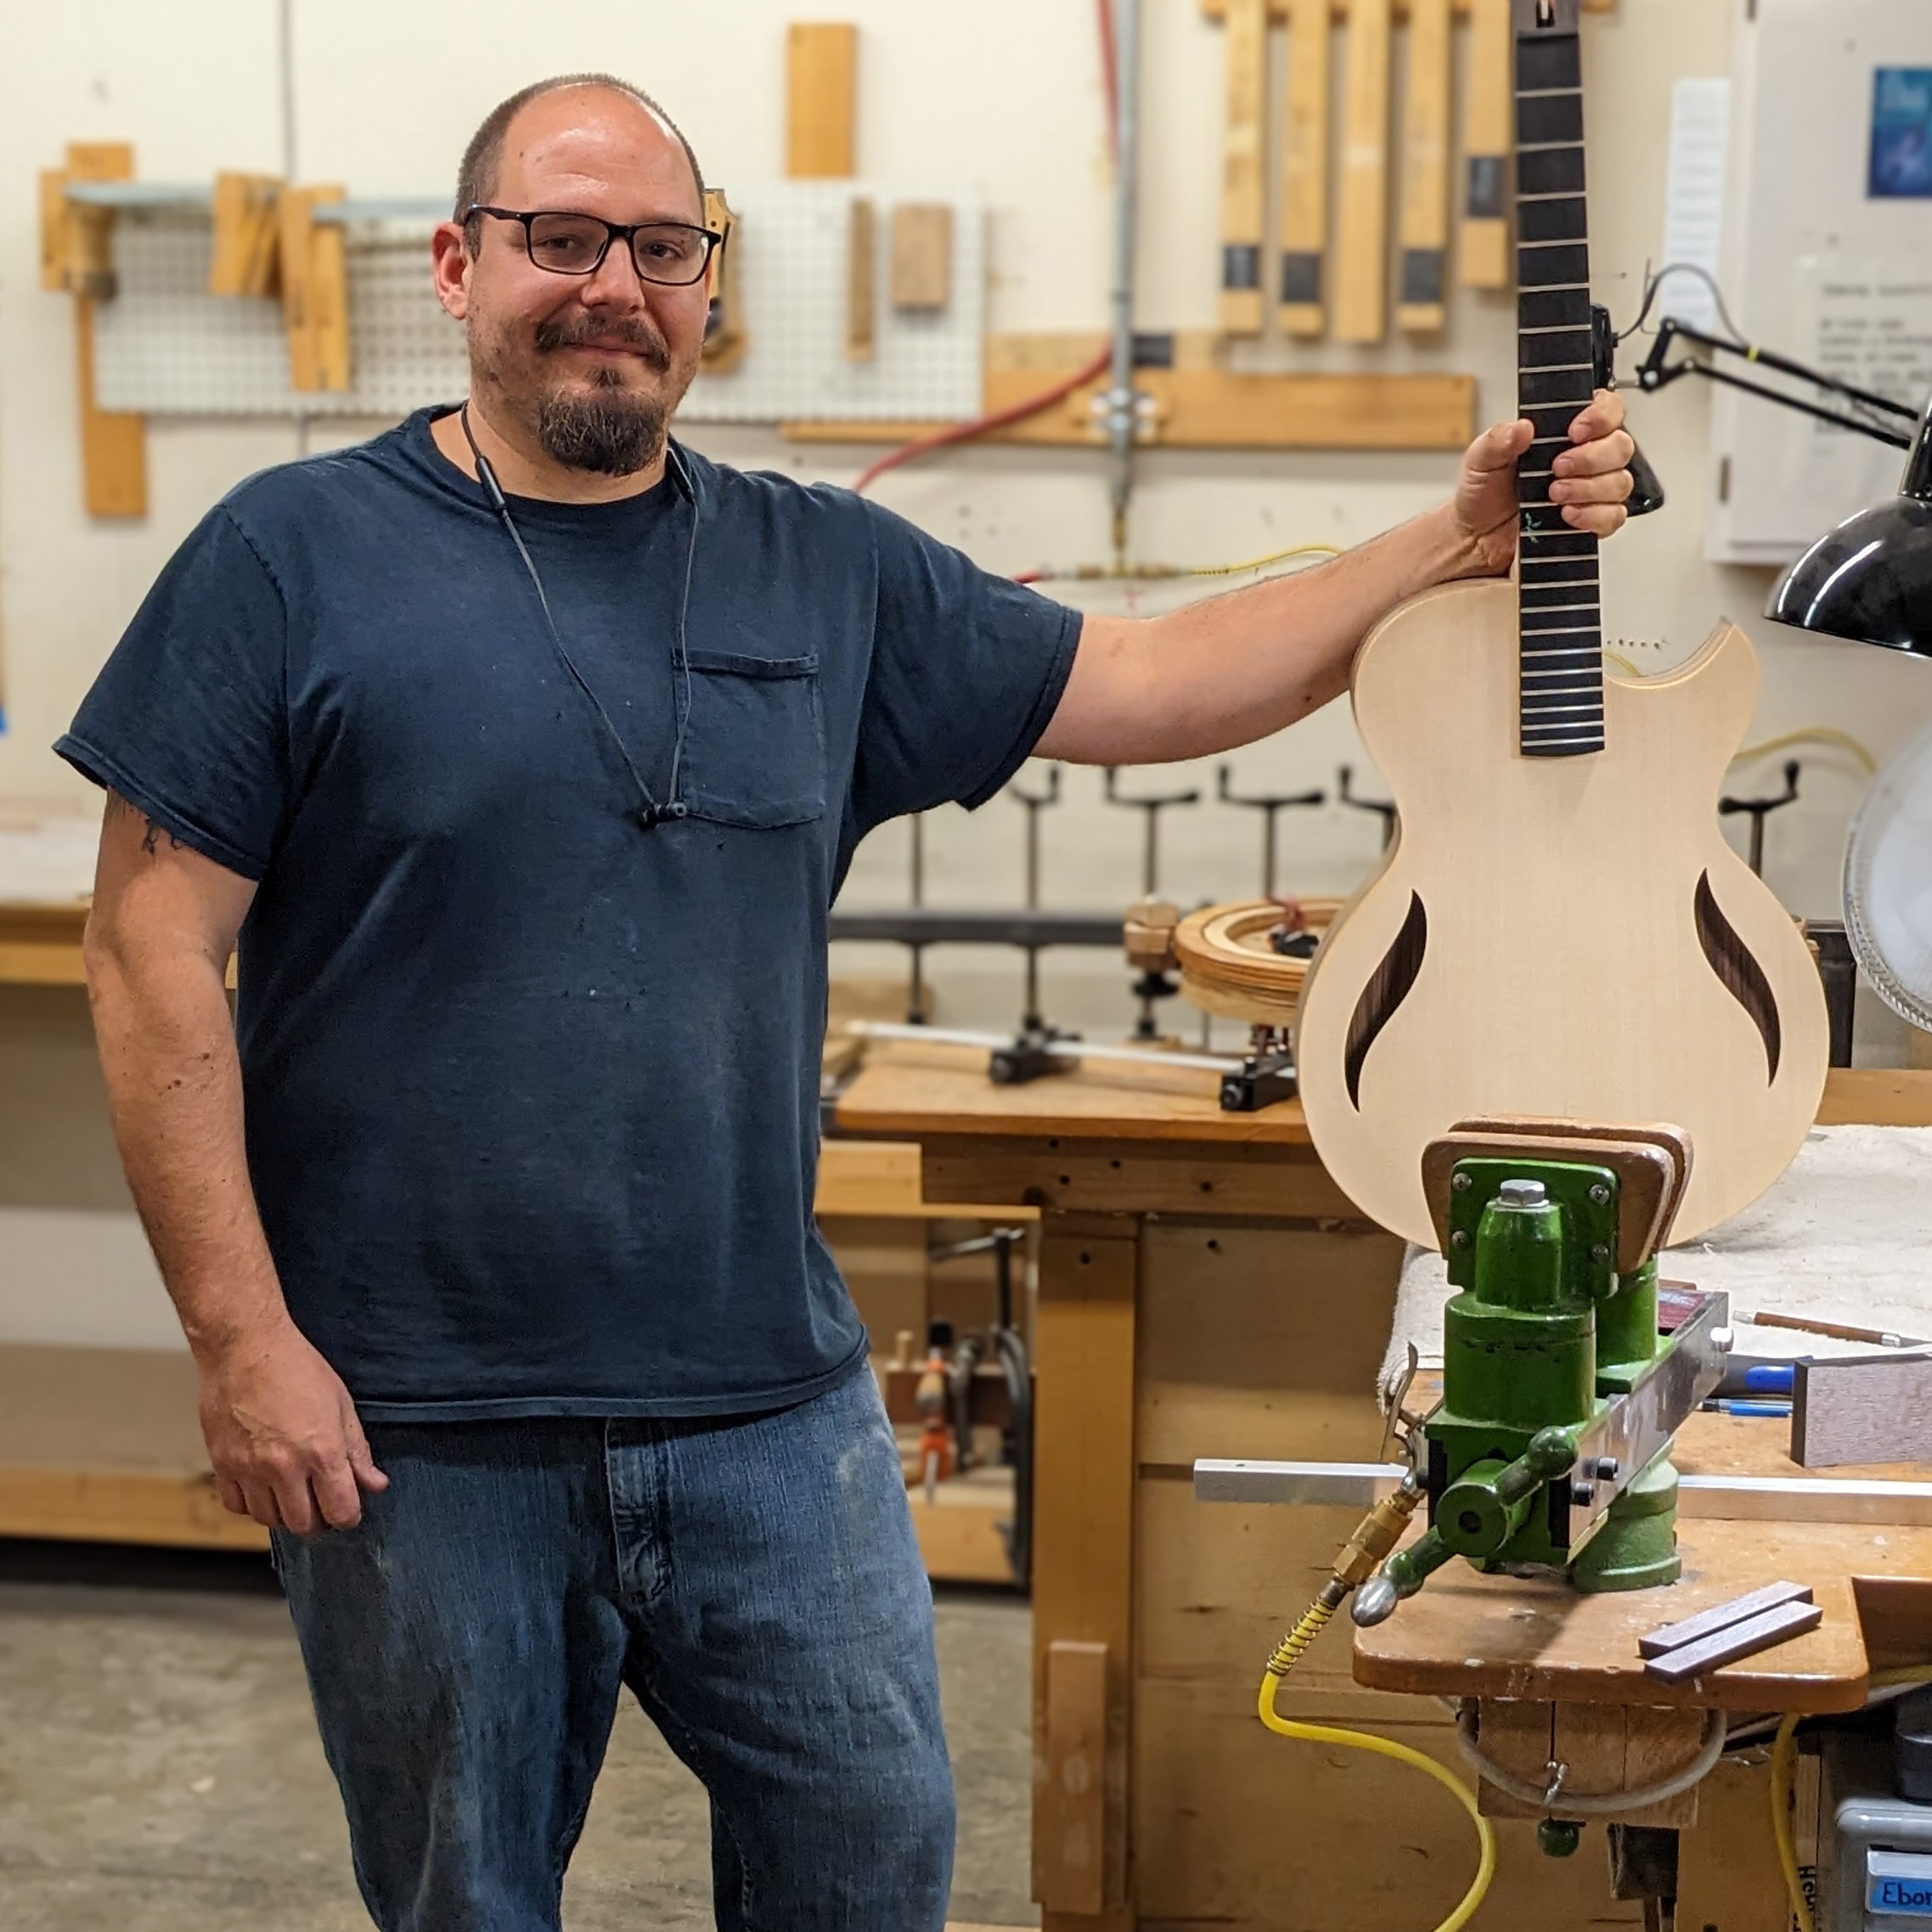 Luthier, Steve Holzknecht hold an in-progress guitar at his bench.